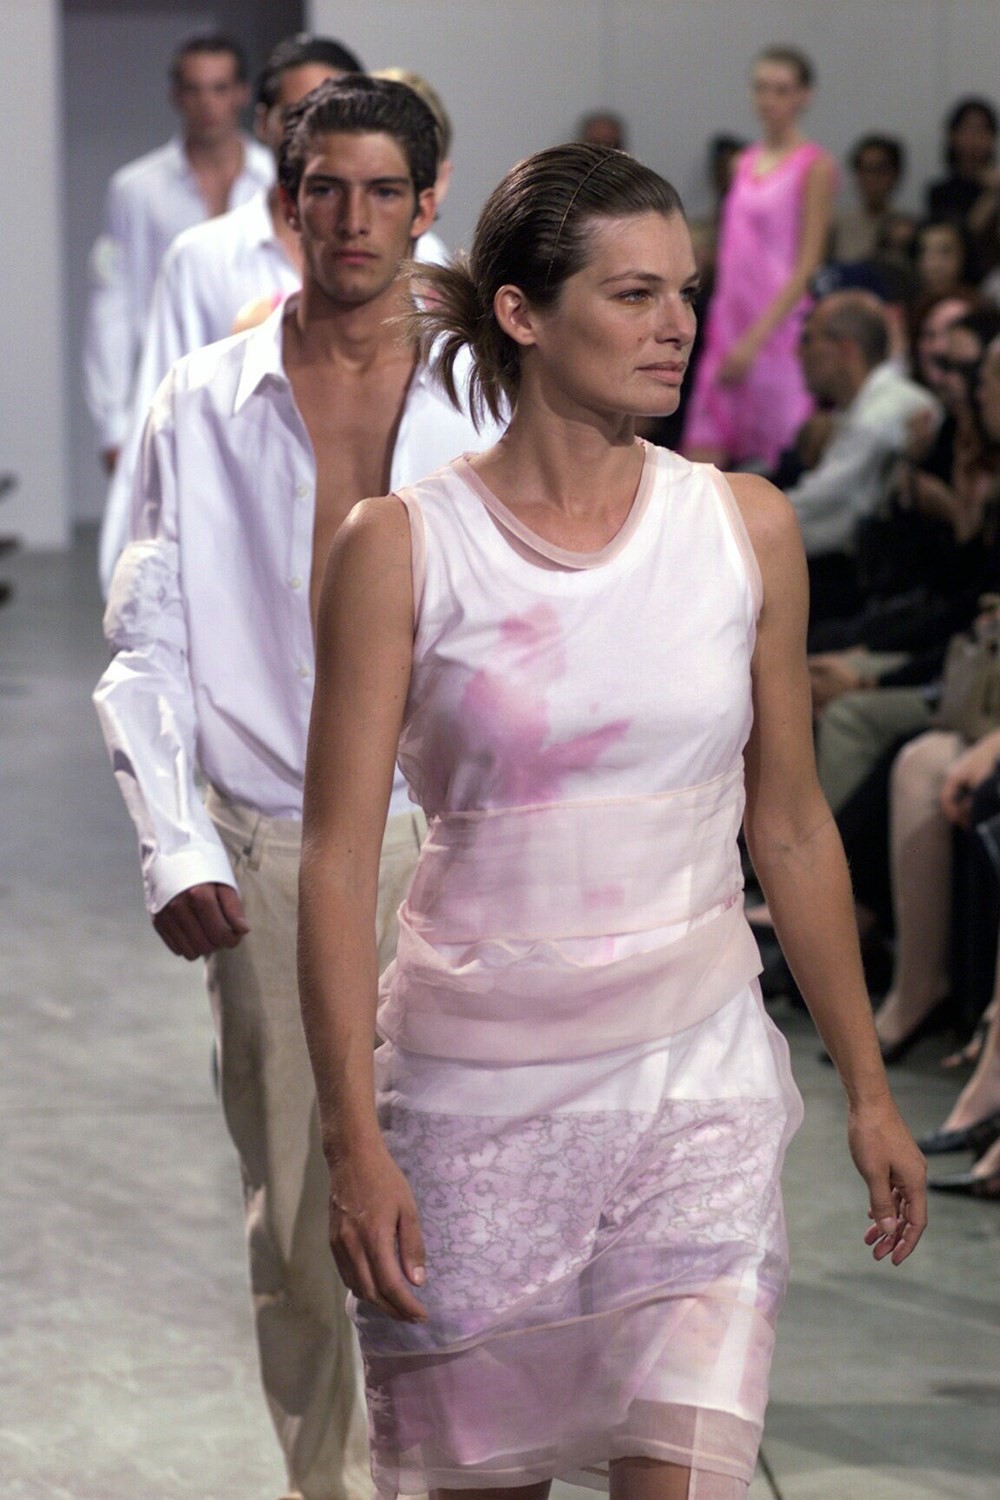 Helmut Lang Spring 1999 Ready-to-Wear Fashion Show